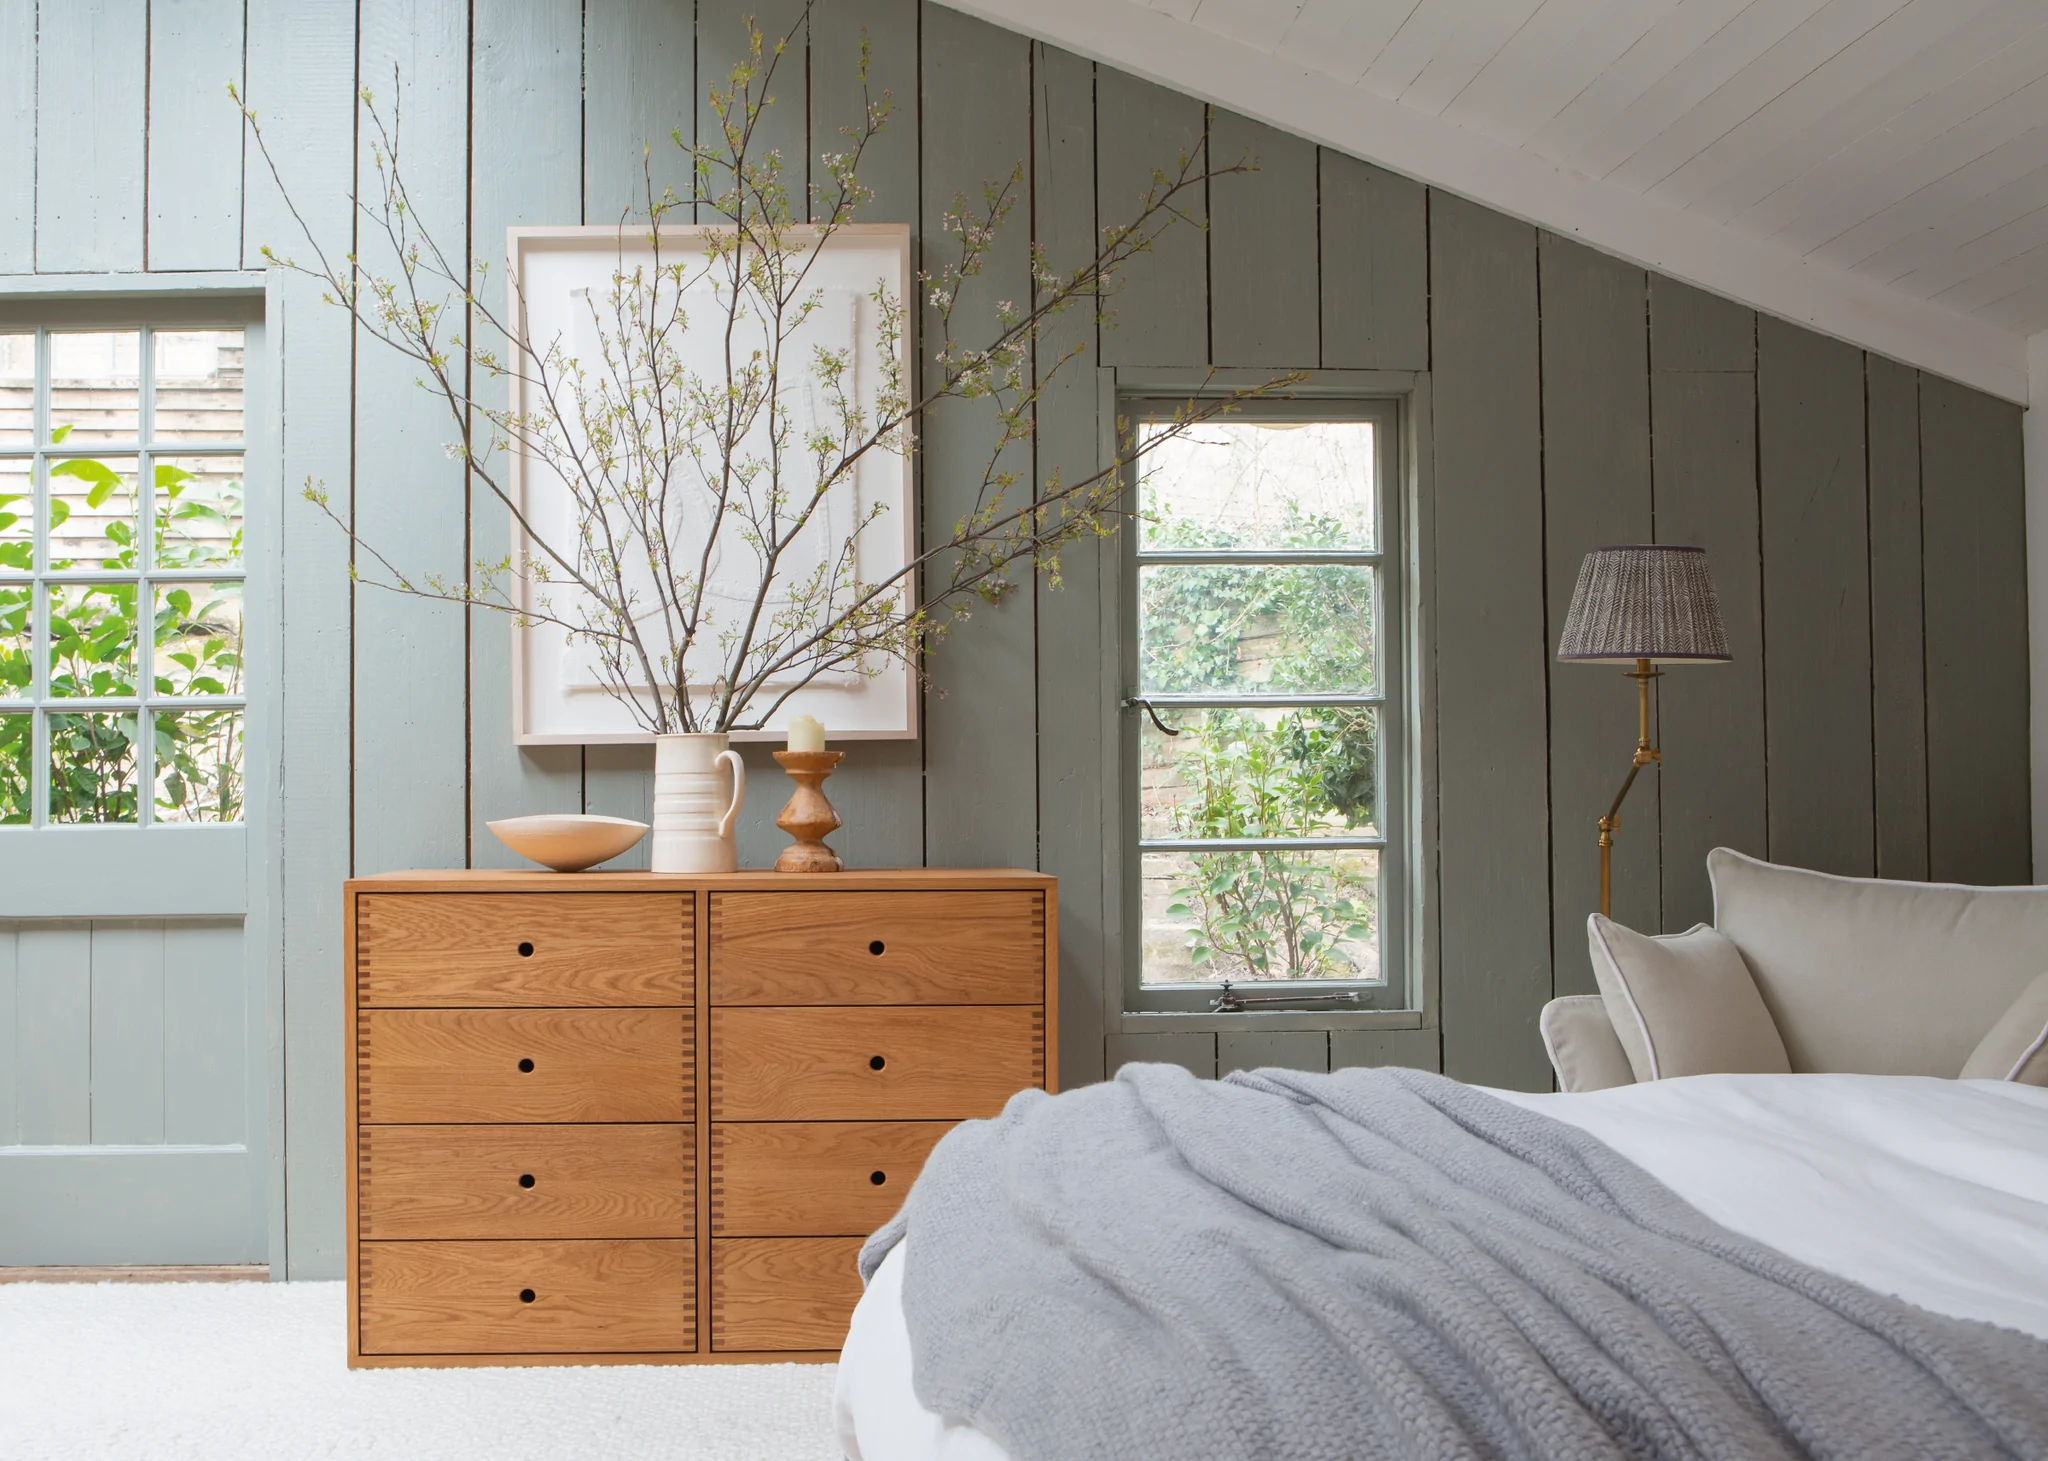 5 Expert Tips On How to Increase Bedroom Storage